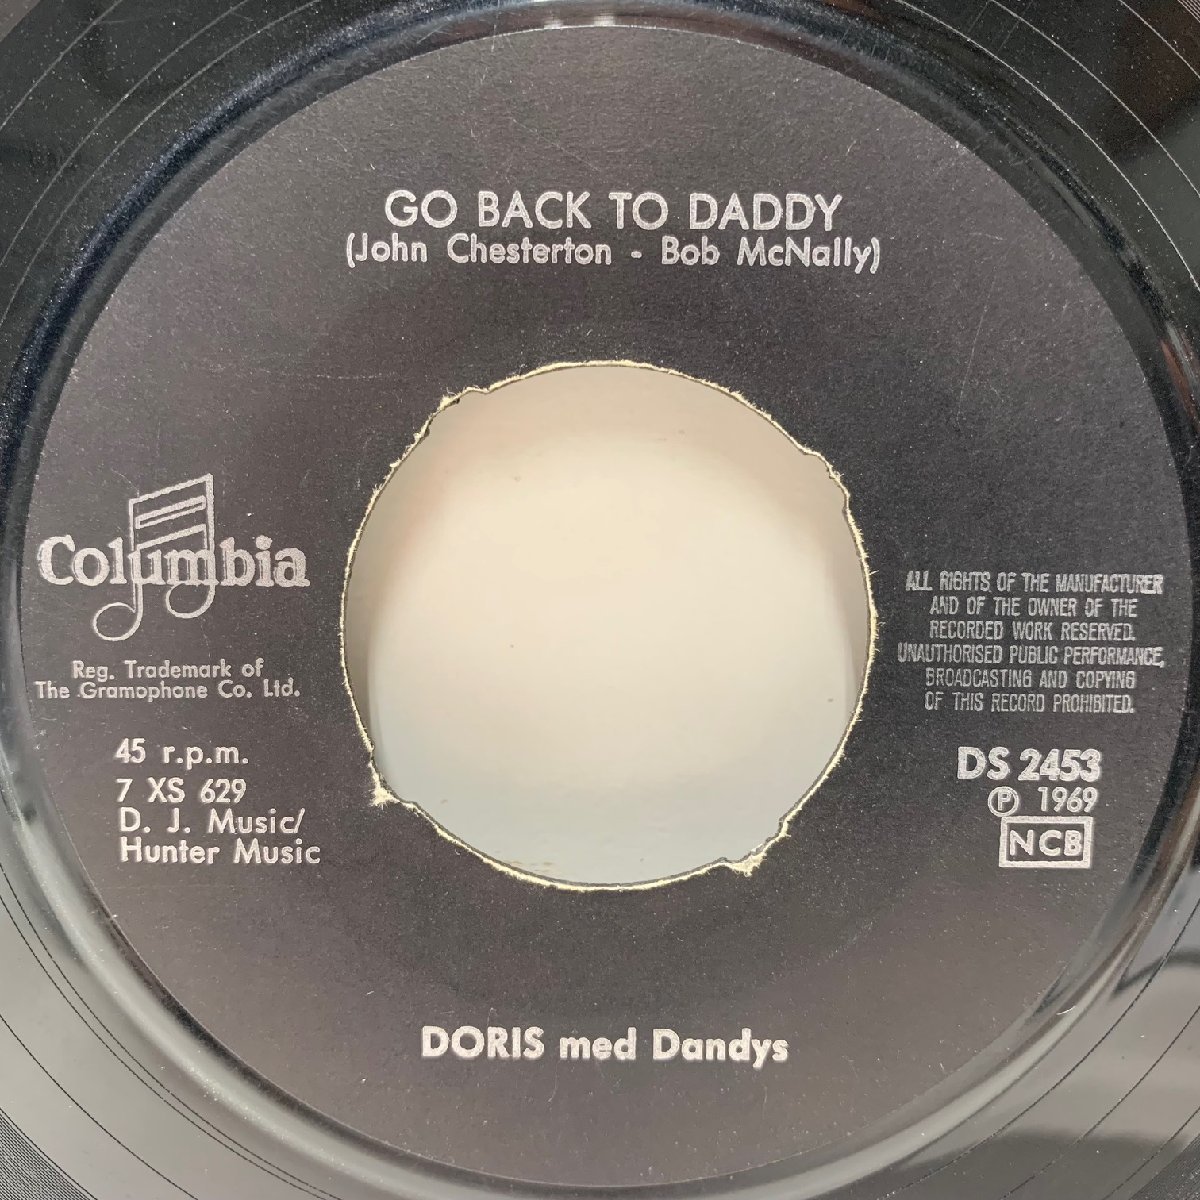 Sweden 7'' オンリー オリジナル DORIS Go Back To Daddy / What A Lovely Way ('69 Columbia) スウェデッシュ・ポップ Soft Rockの画像1